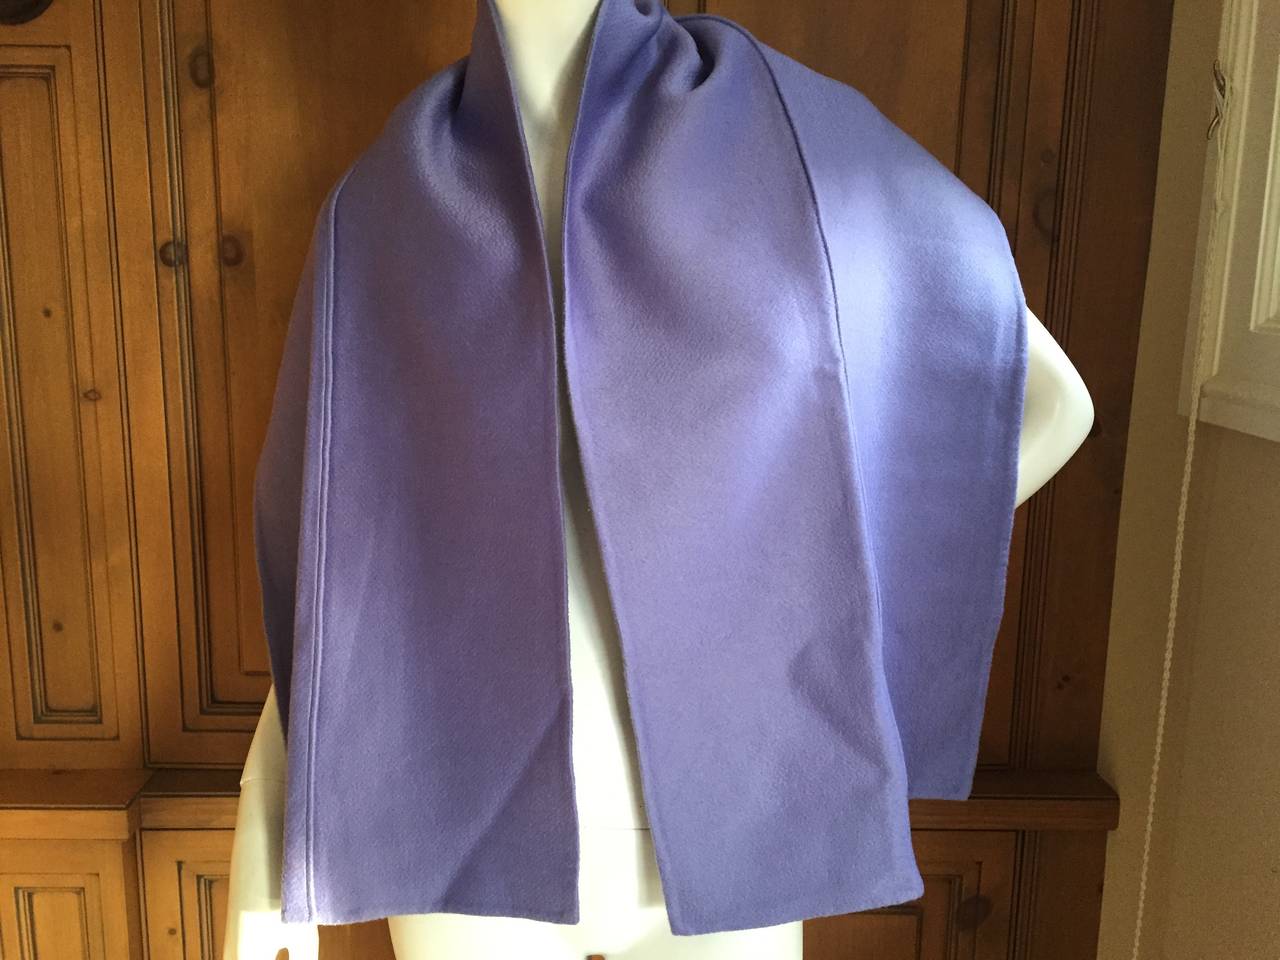 Periwinkle purple double faced cashmere scarf/ shawl from Ralph Rucci.

14